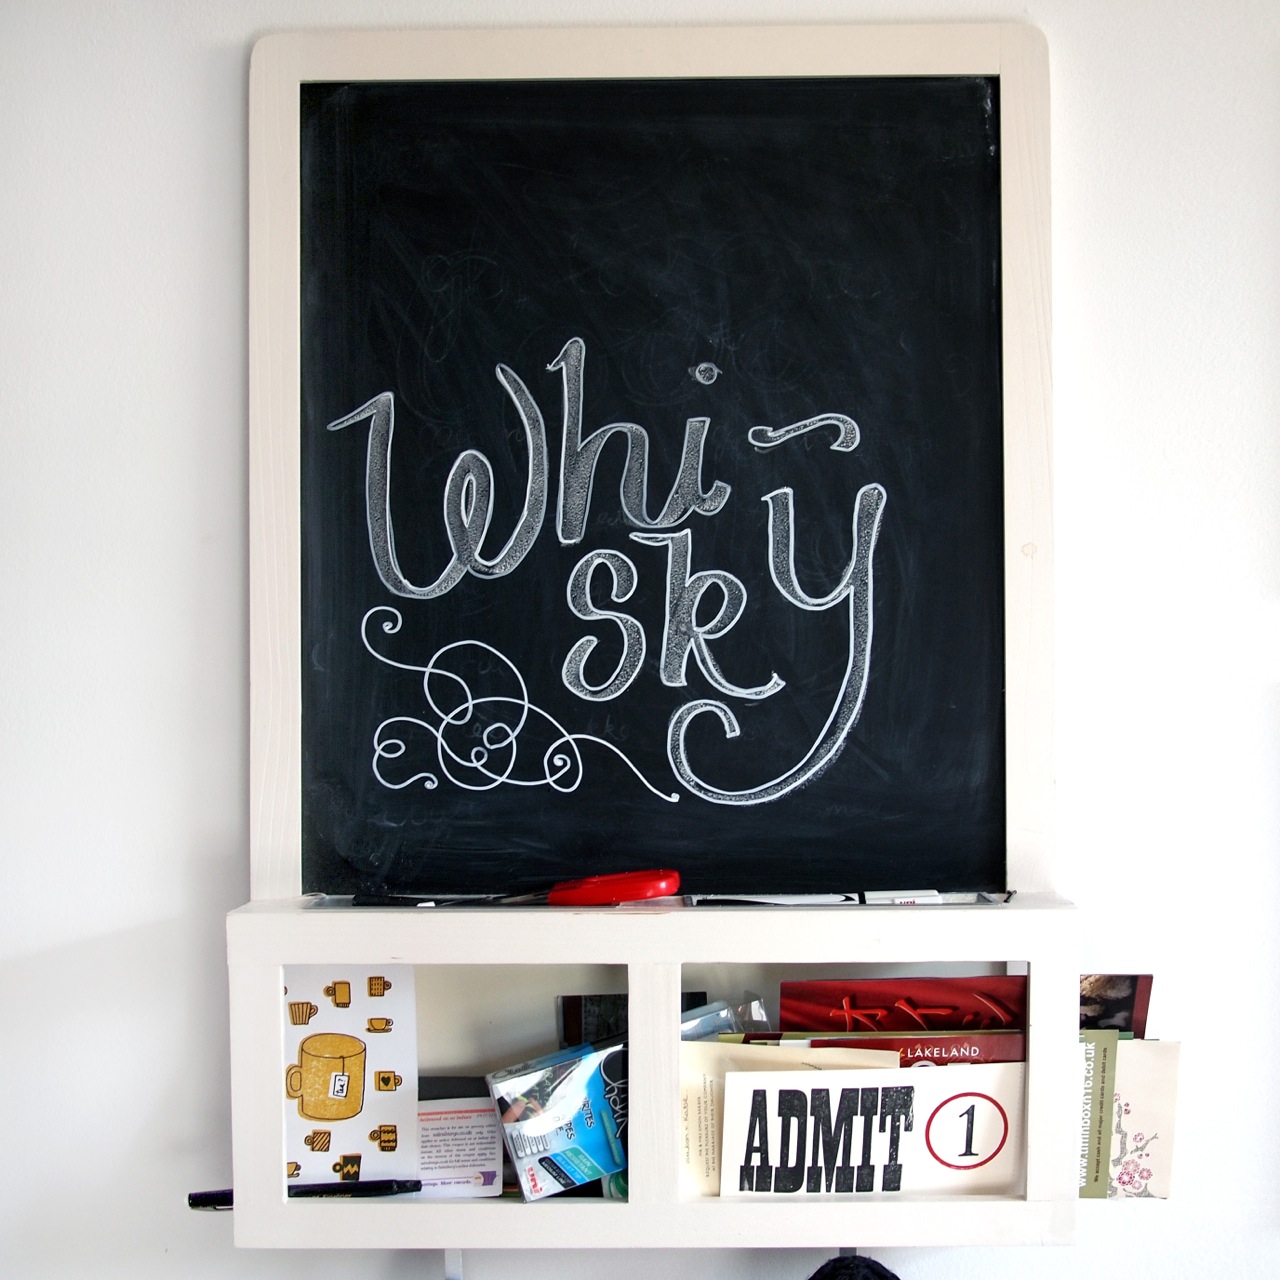 Good design makes me happy: Chalkboard A Day